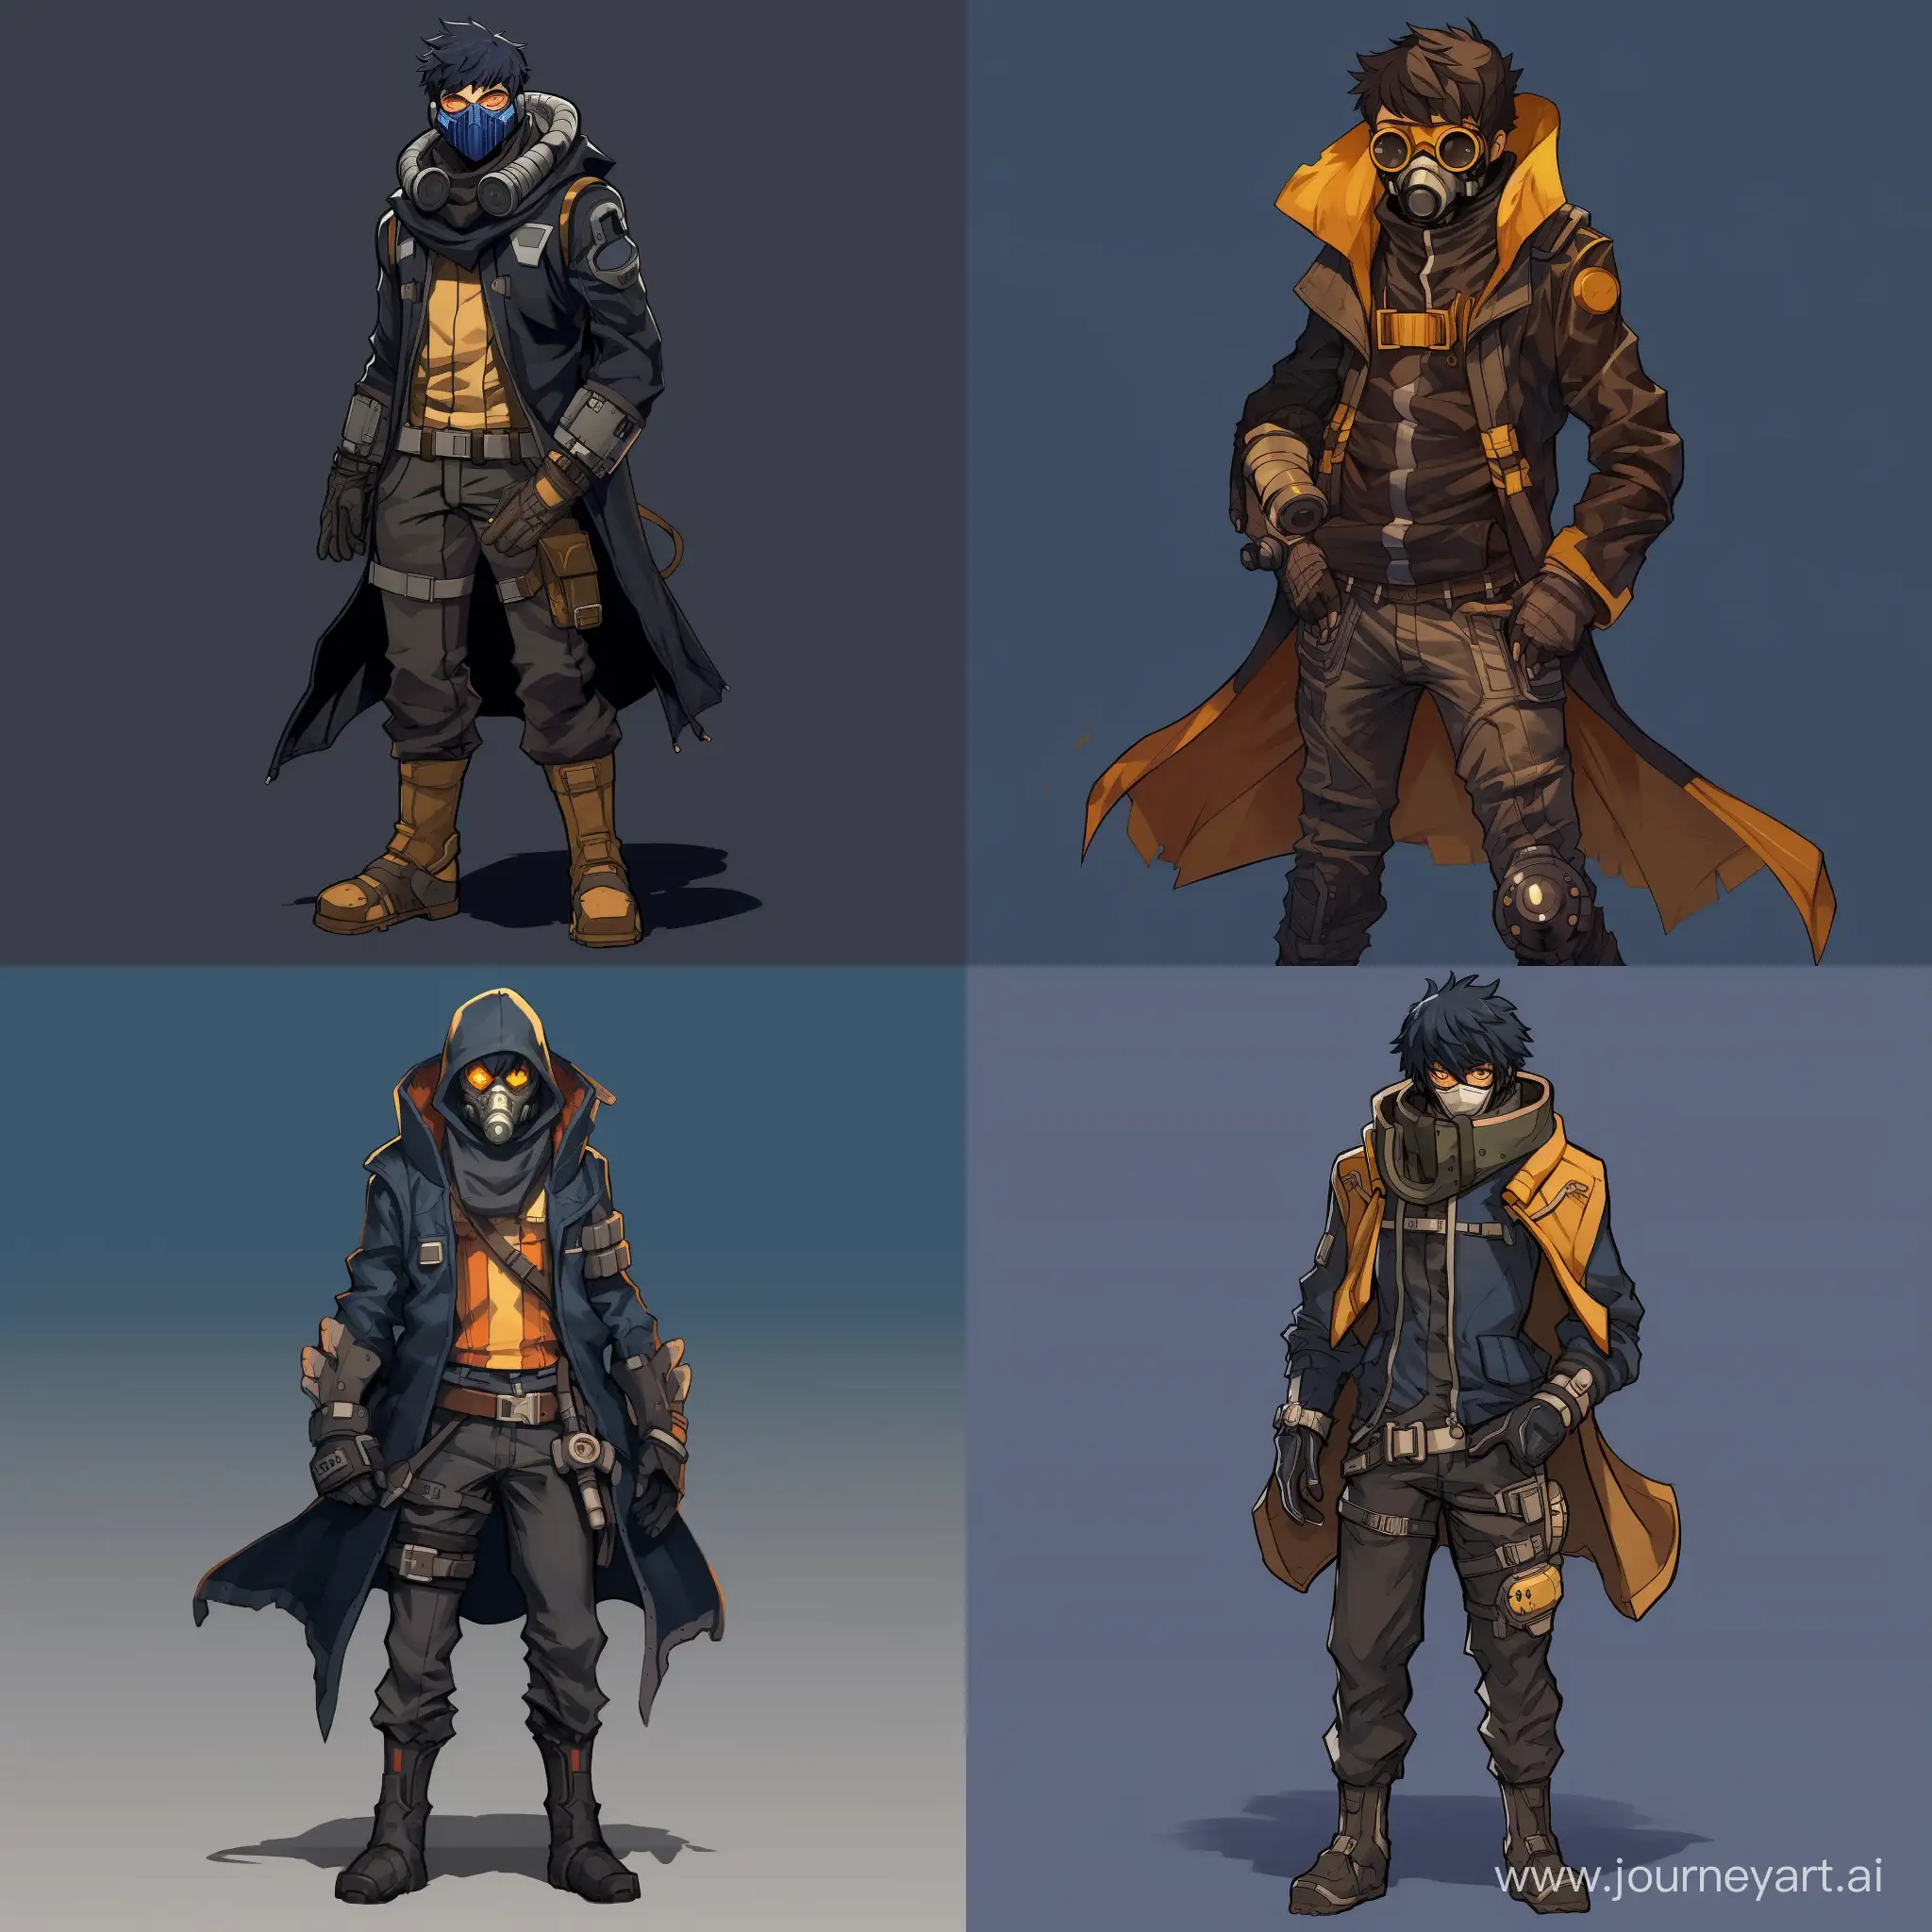 In the style of anime, in full growth. Engineer-scientist with a strong physique. He wears a gas mask with double-filtered, amber-colored lenses. Dressed in a dark blue warm jacket with a hood with fur trim and dark blue jeans. He also wears gray gloves and black combat boots.